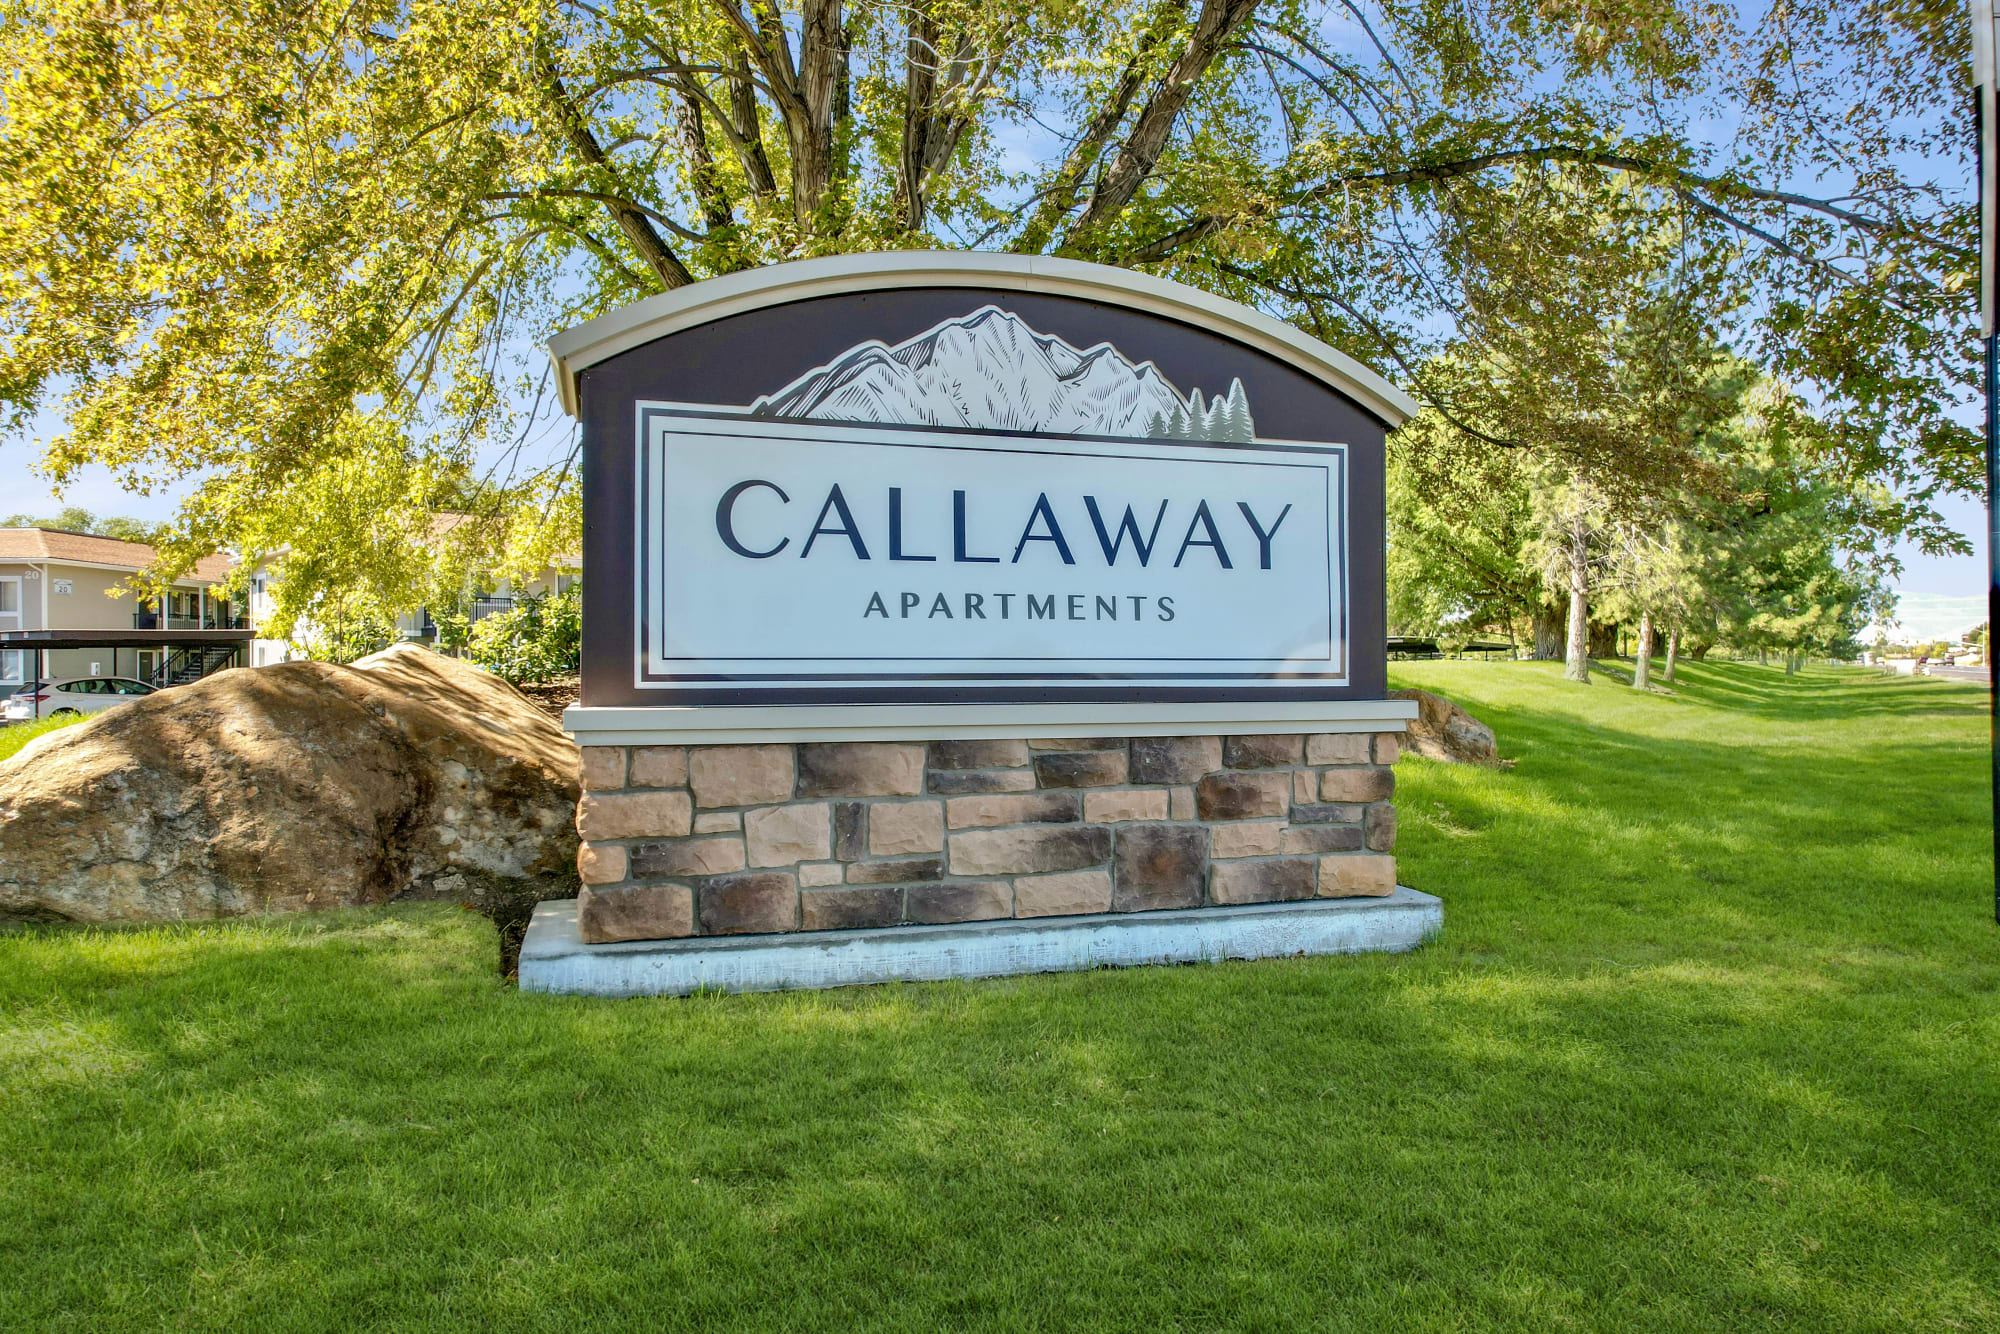 The monument sign in front of Callaway Apartments in Taylorsville, Utah 